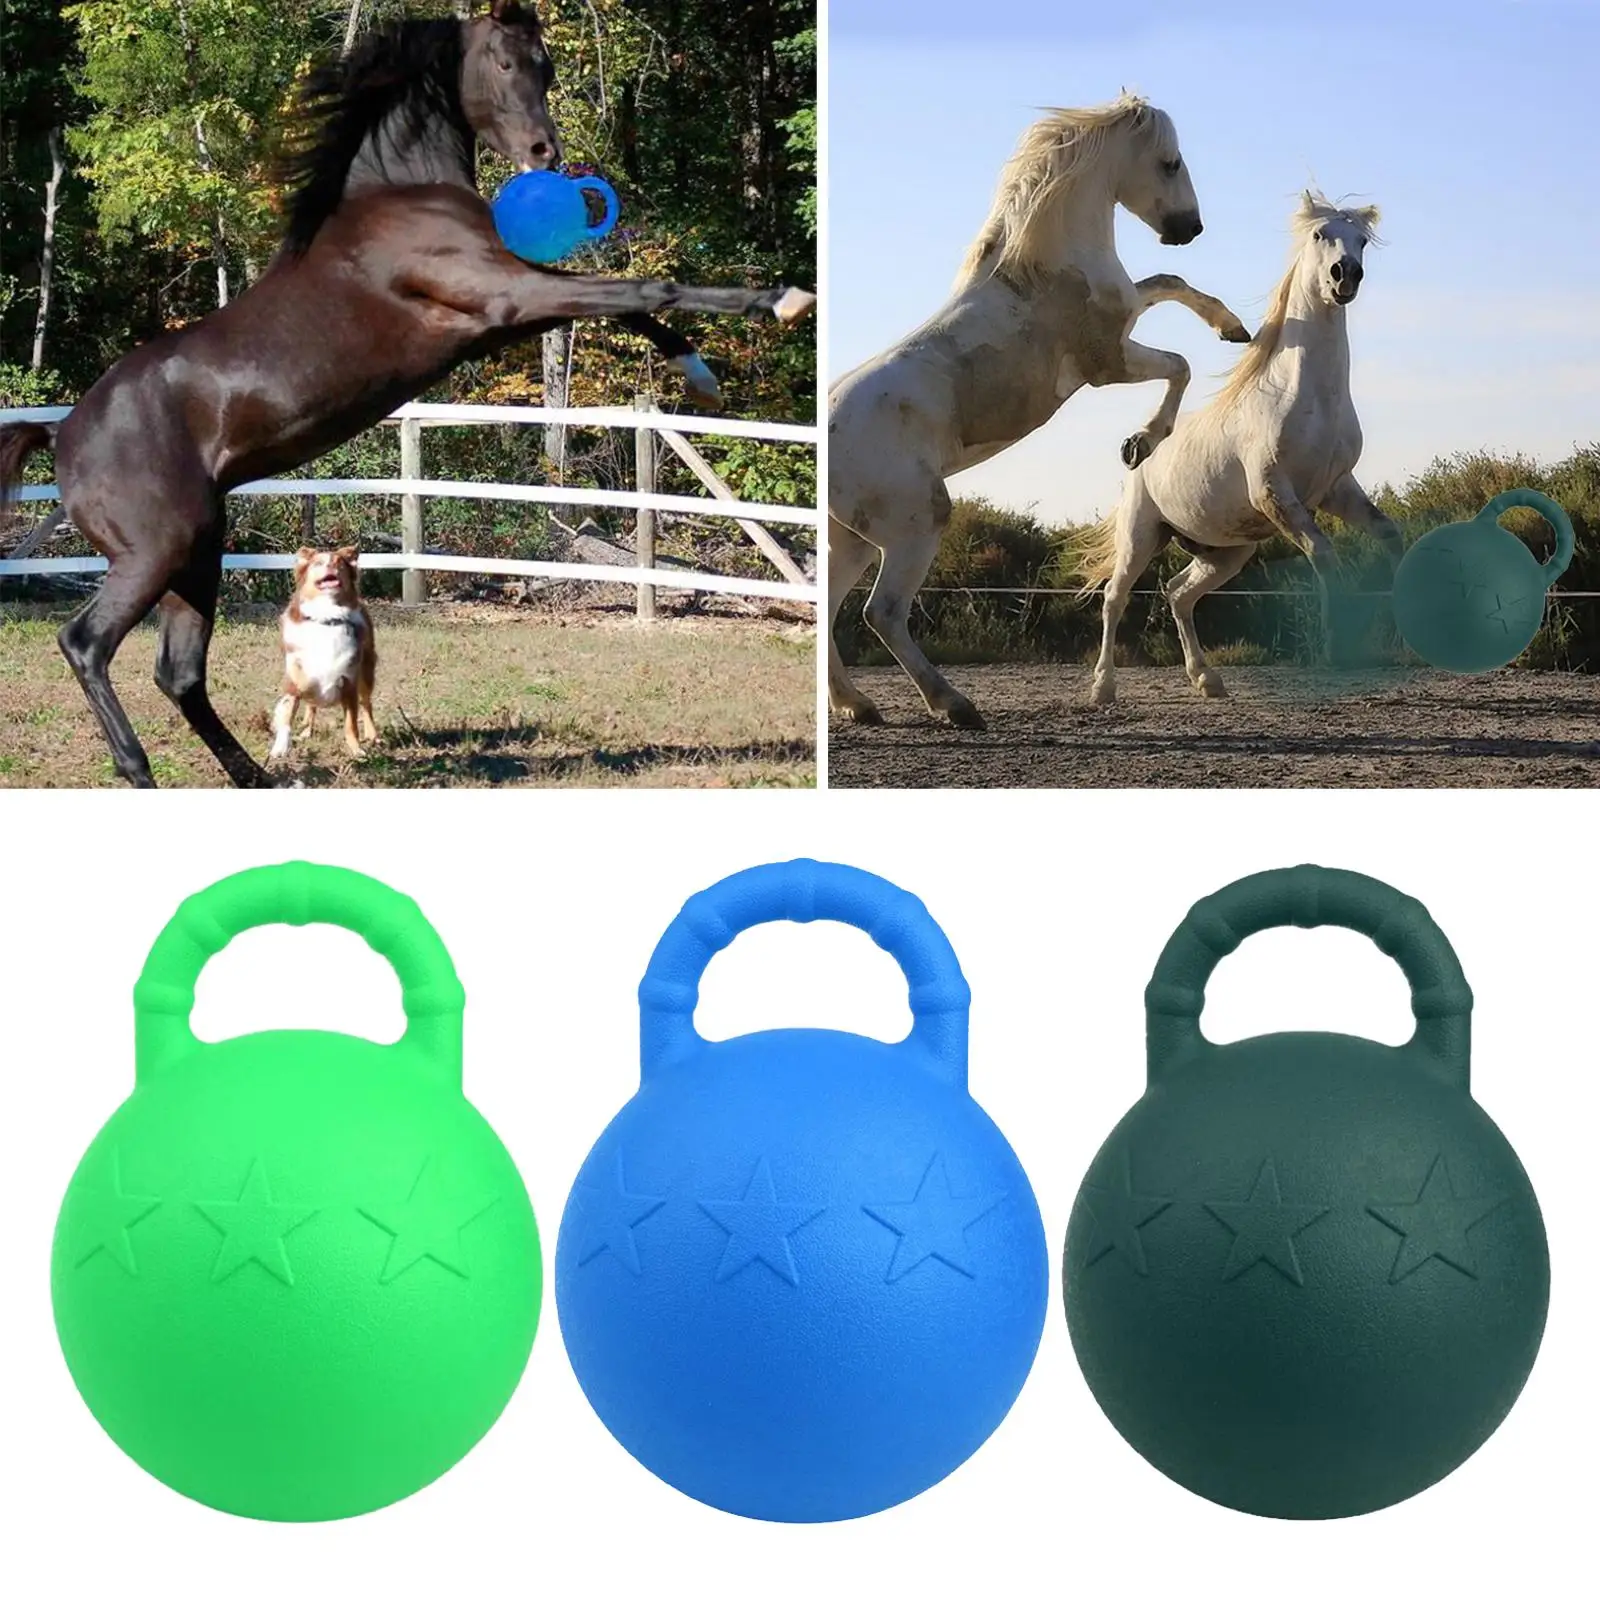 Horse Toys   Pet Large Dogs Joy Bouncy Soccer Ball Equine Chew Paly Balls Fun Accessories